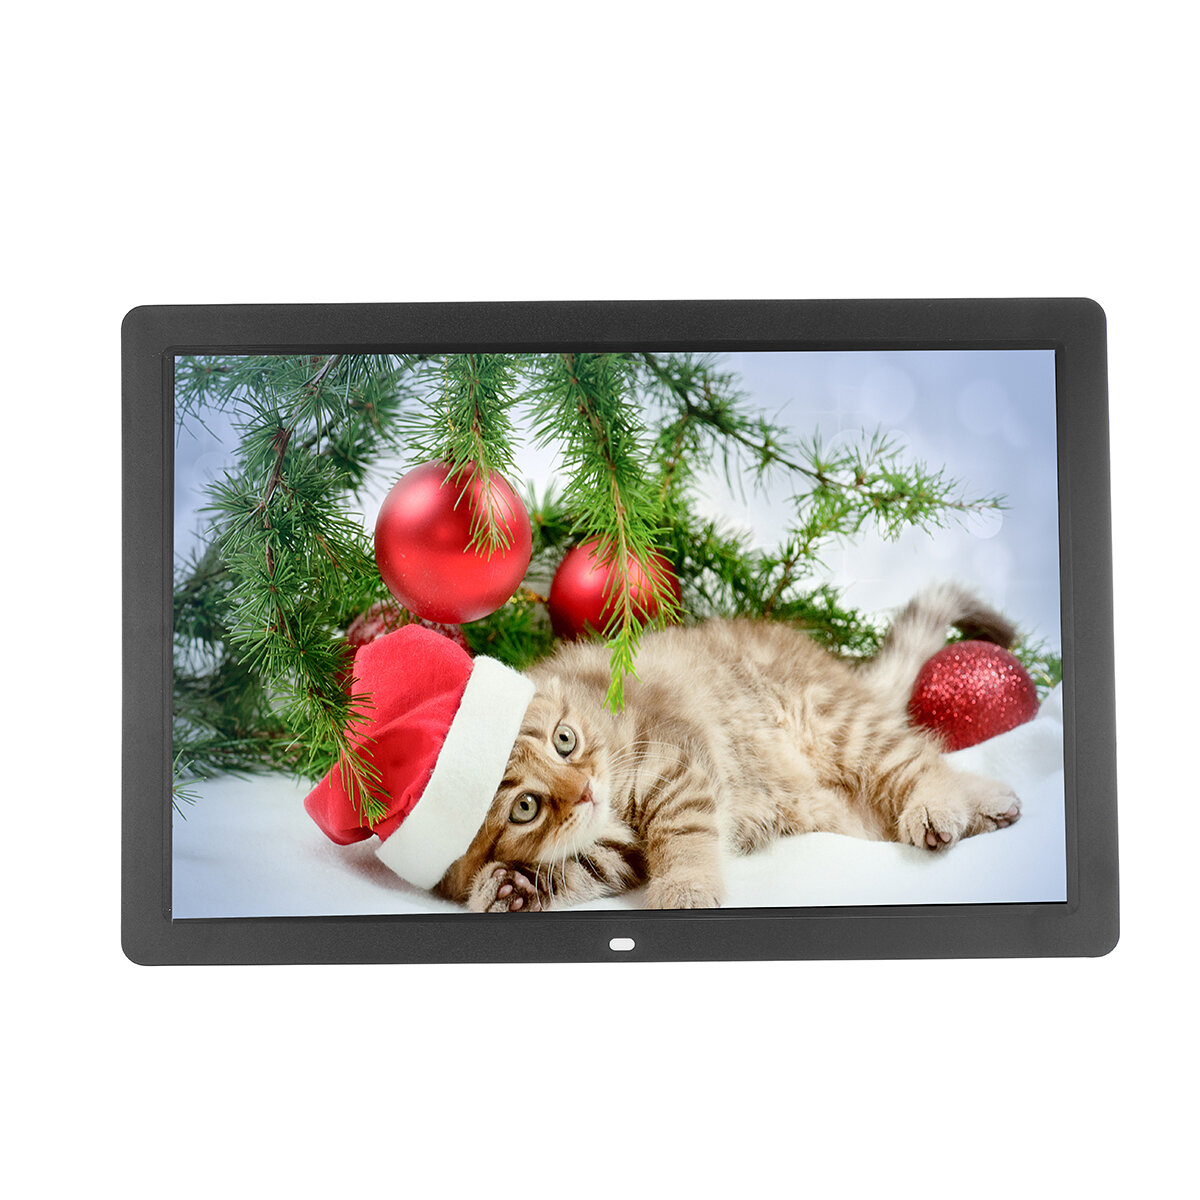 17 Inch 1440x900P 16:9 HD Touch Screen Digital Photo Frame Audio Video Player Support MP3 WMA MPEG4 Format with Remote C